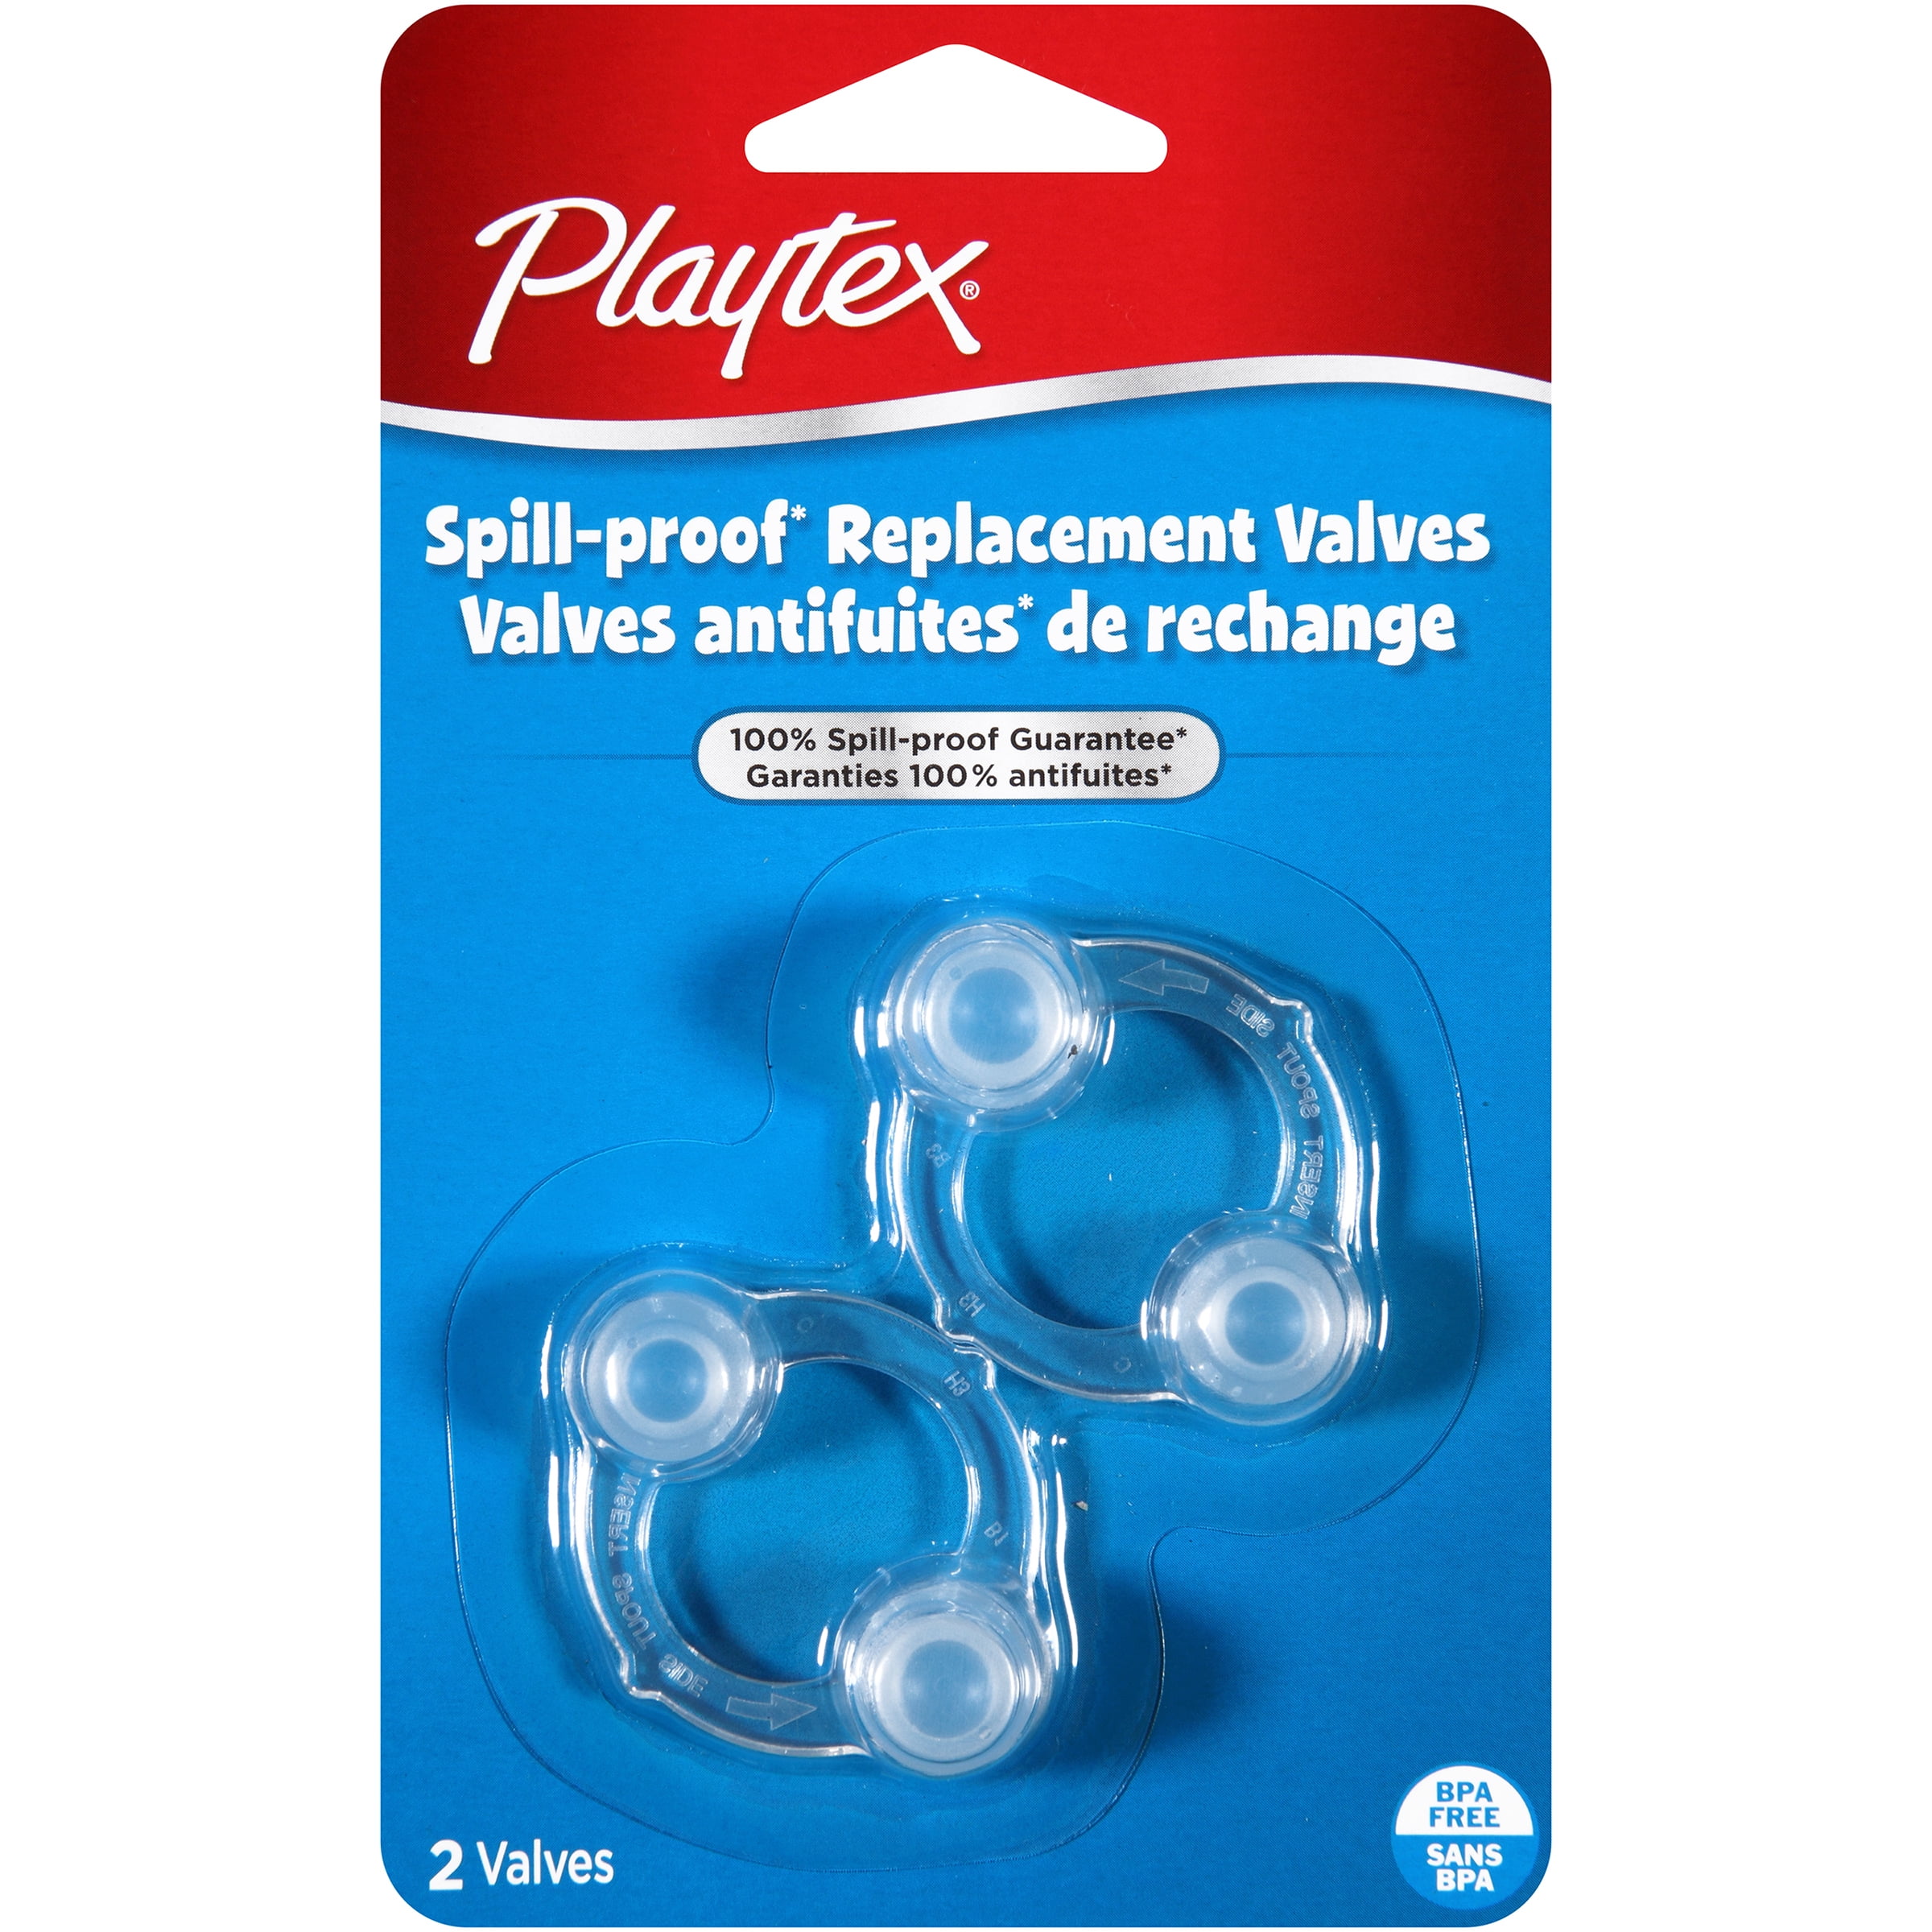 2 Count Pack of 2 Playtex Baby Spill Proof Replacement Valves for Cups 